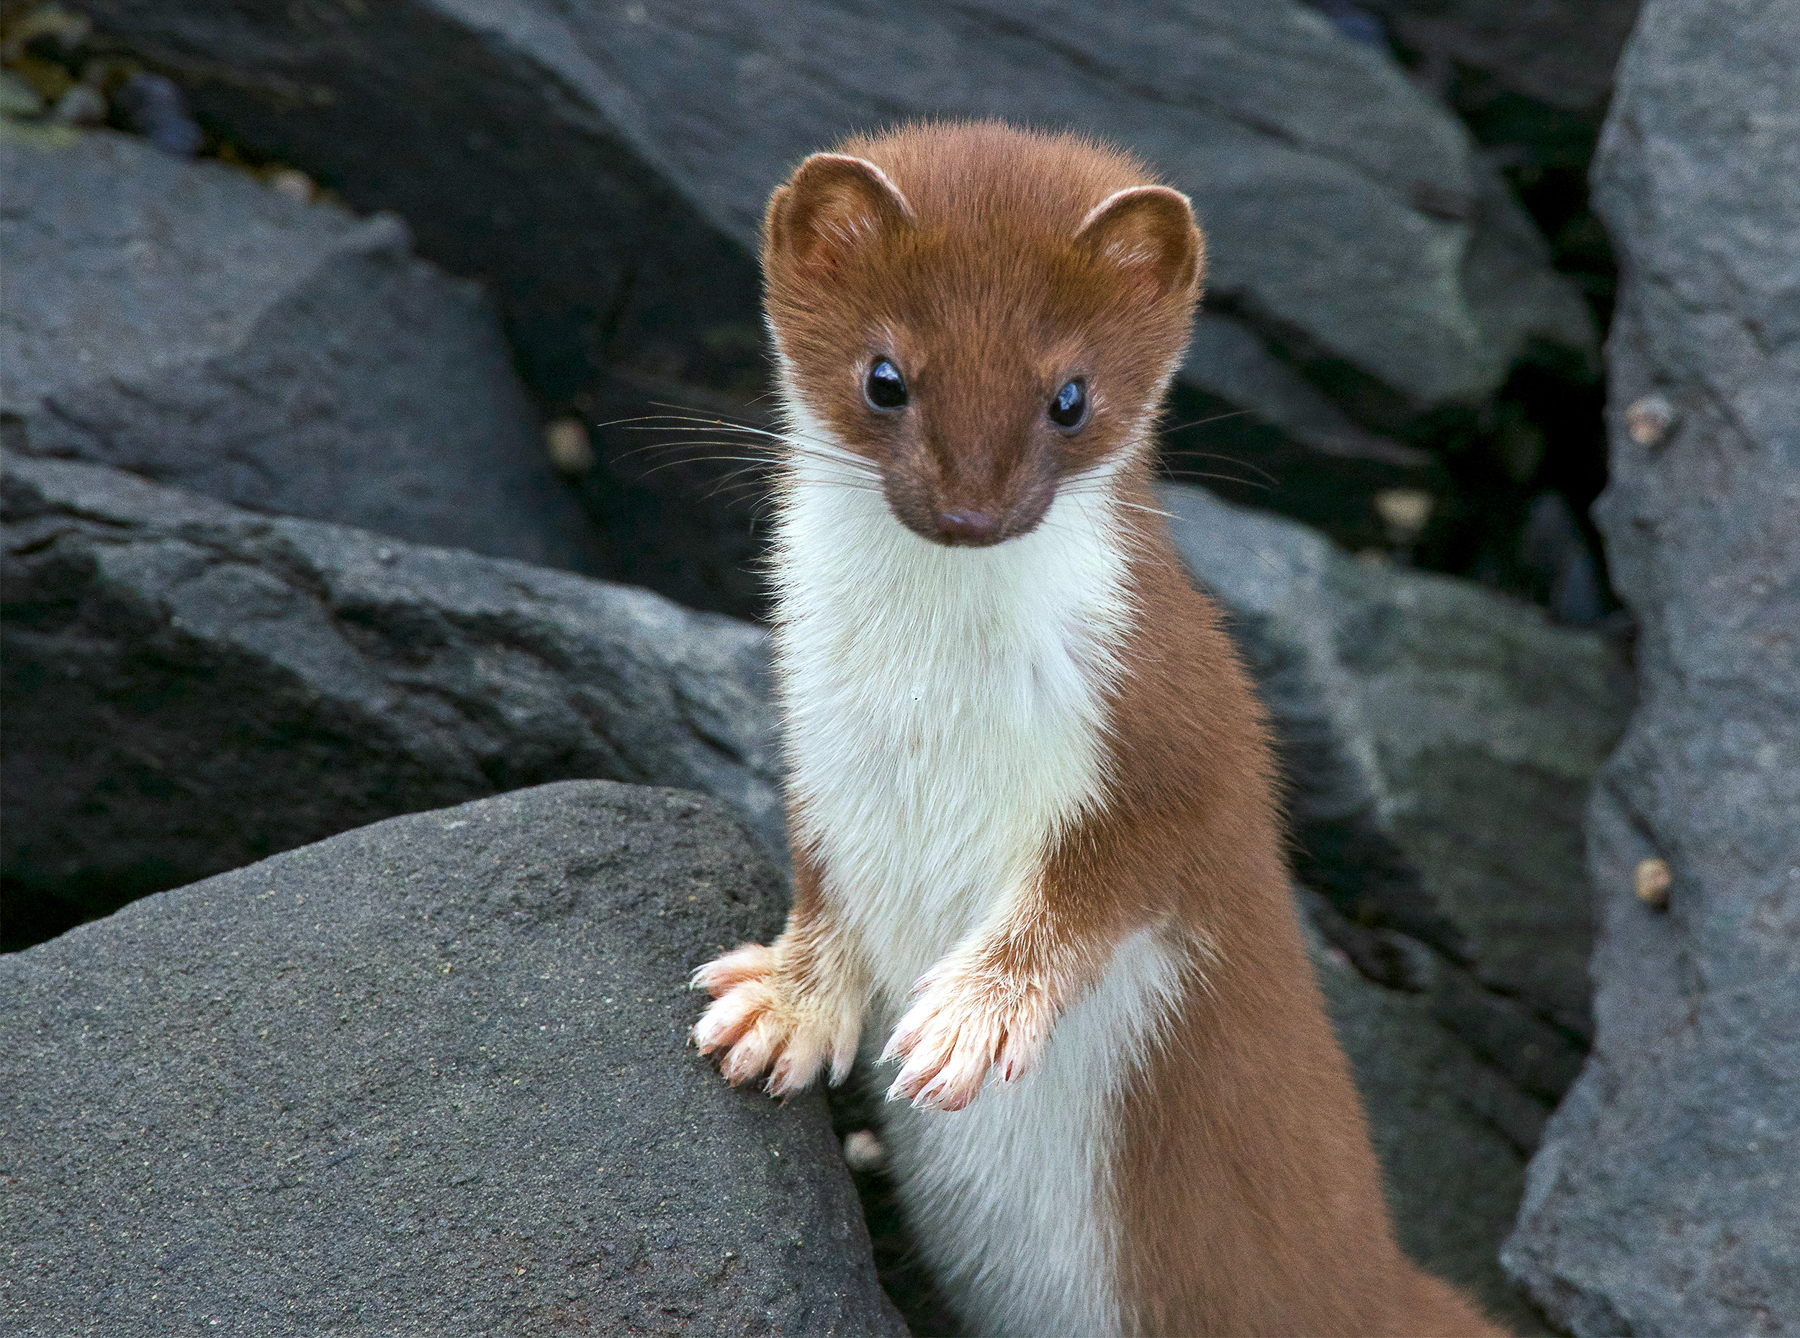 A short-tailed weasel perches among a group of large rocks. (photo © Stacy Studebaker/USFWS via the Creative Commons)